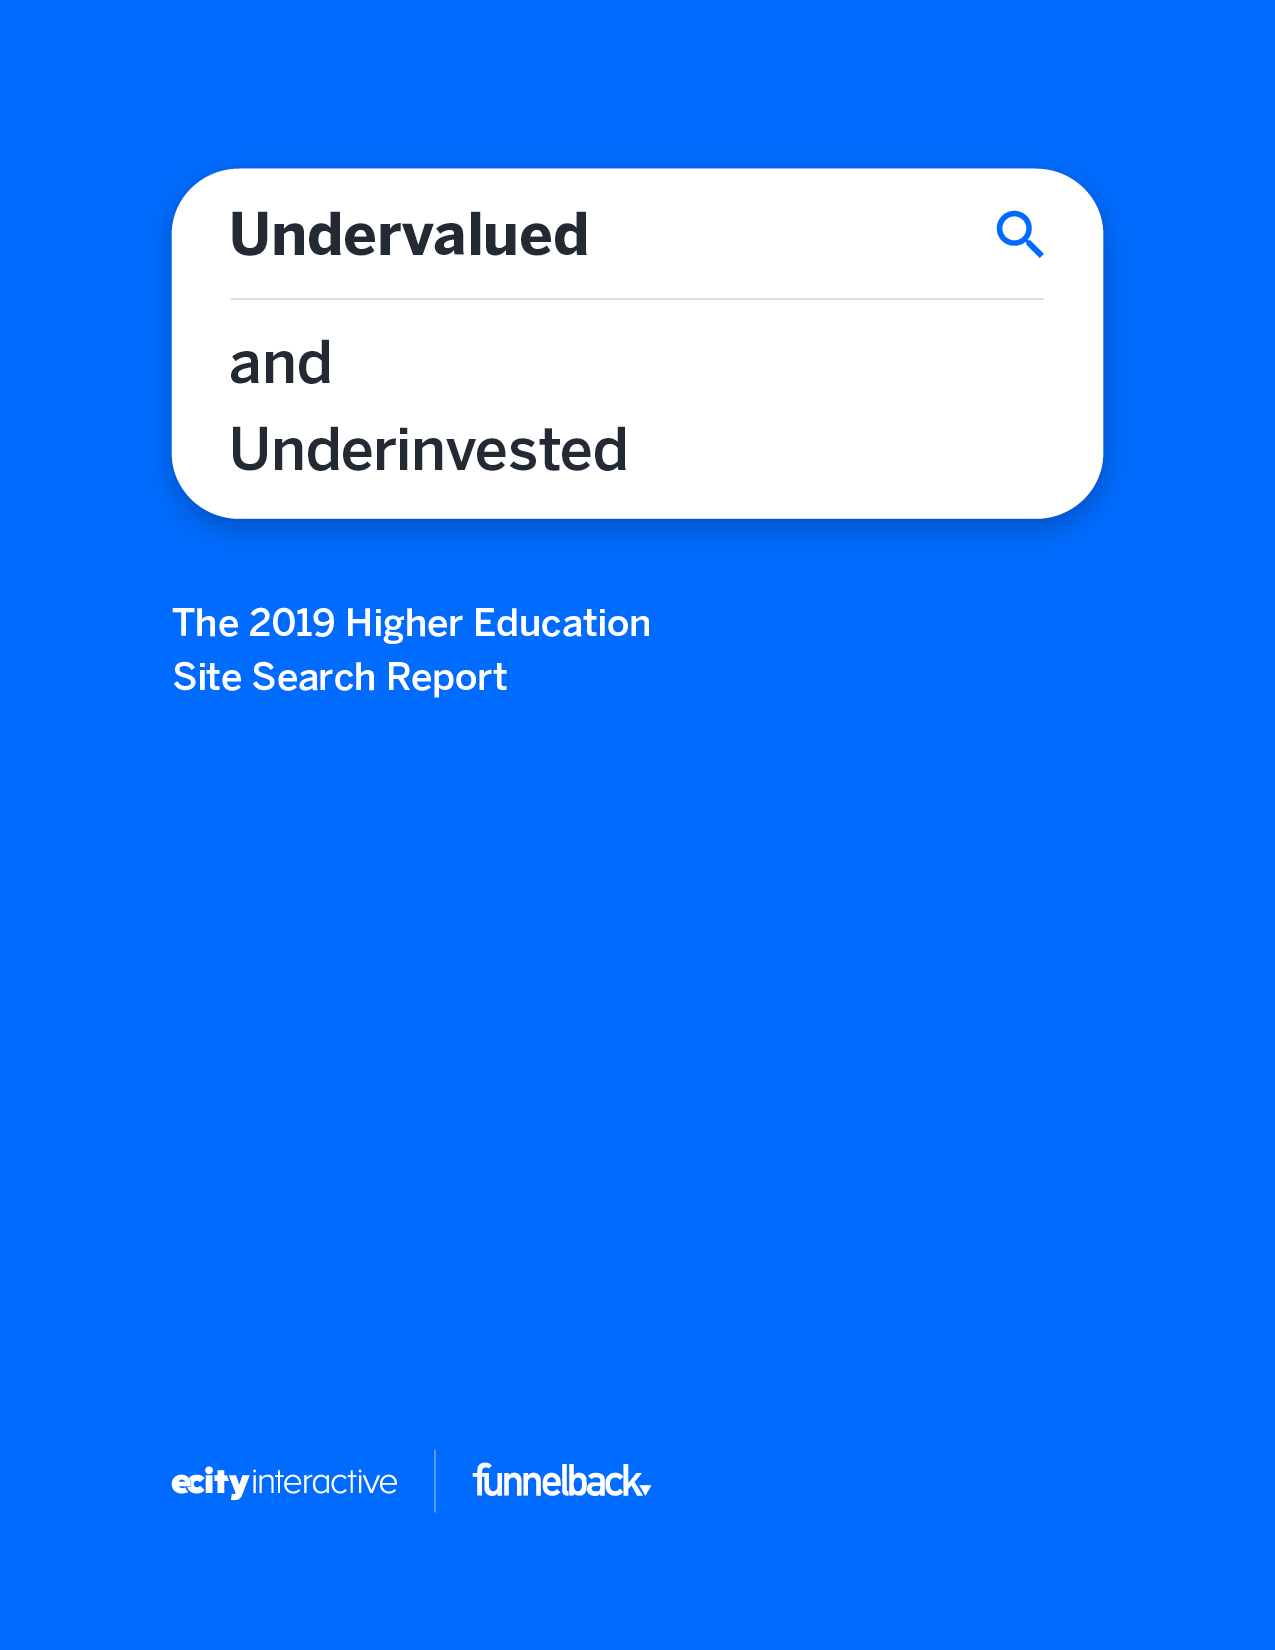 The 2020 Higher Education Site Search Report